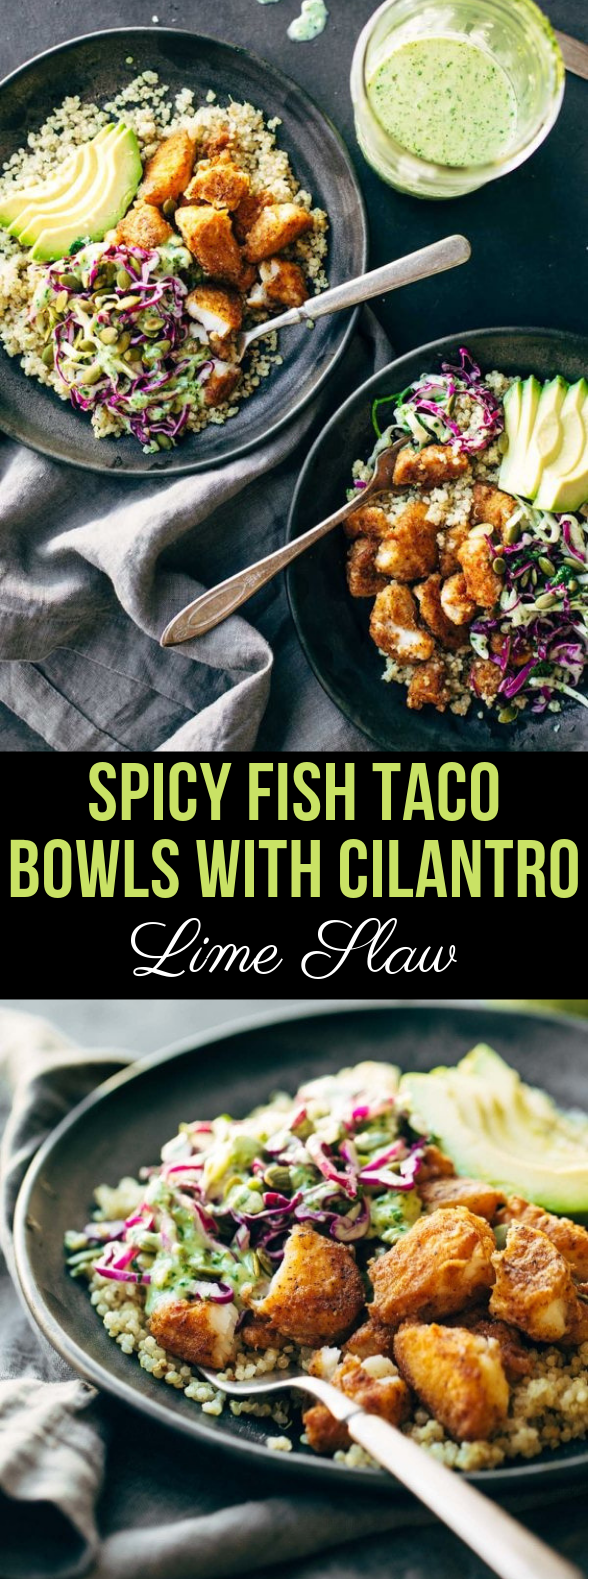 Spicy Fish Taco Bowls with Cilantro Lime Slaw #Dinner #EasyRecipe